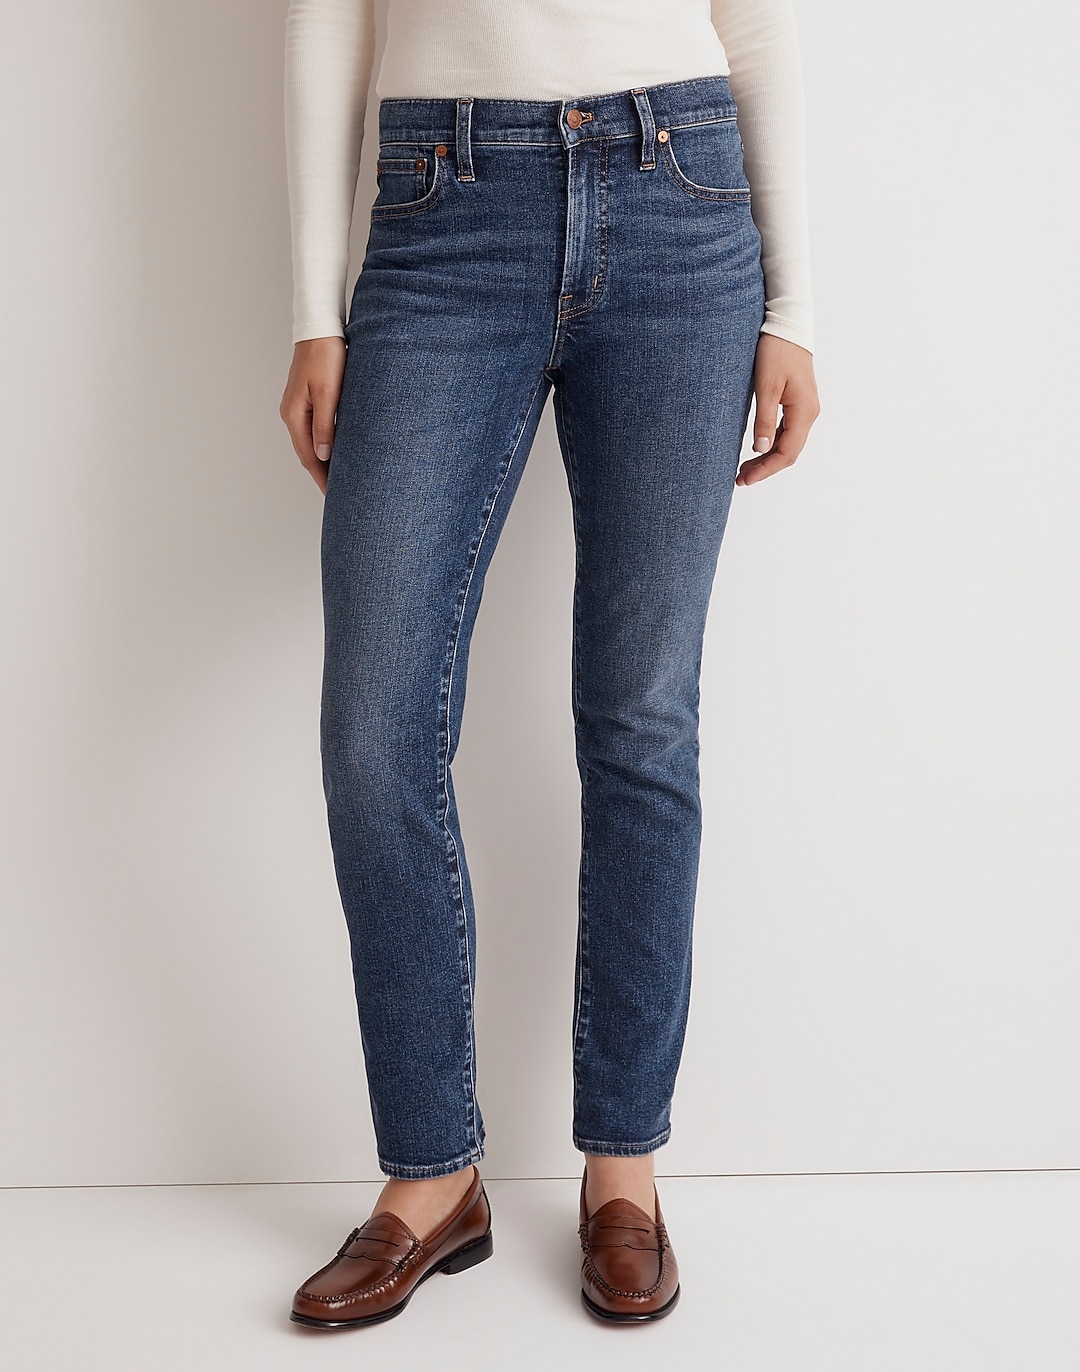 The Perfect Vintage Jean in Deming Wash | Madewell